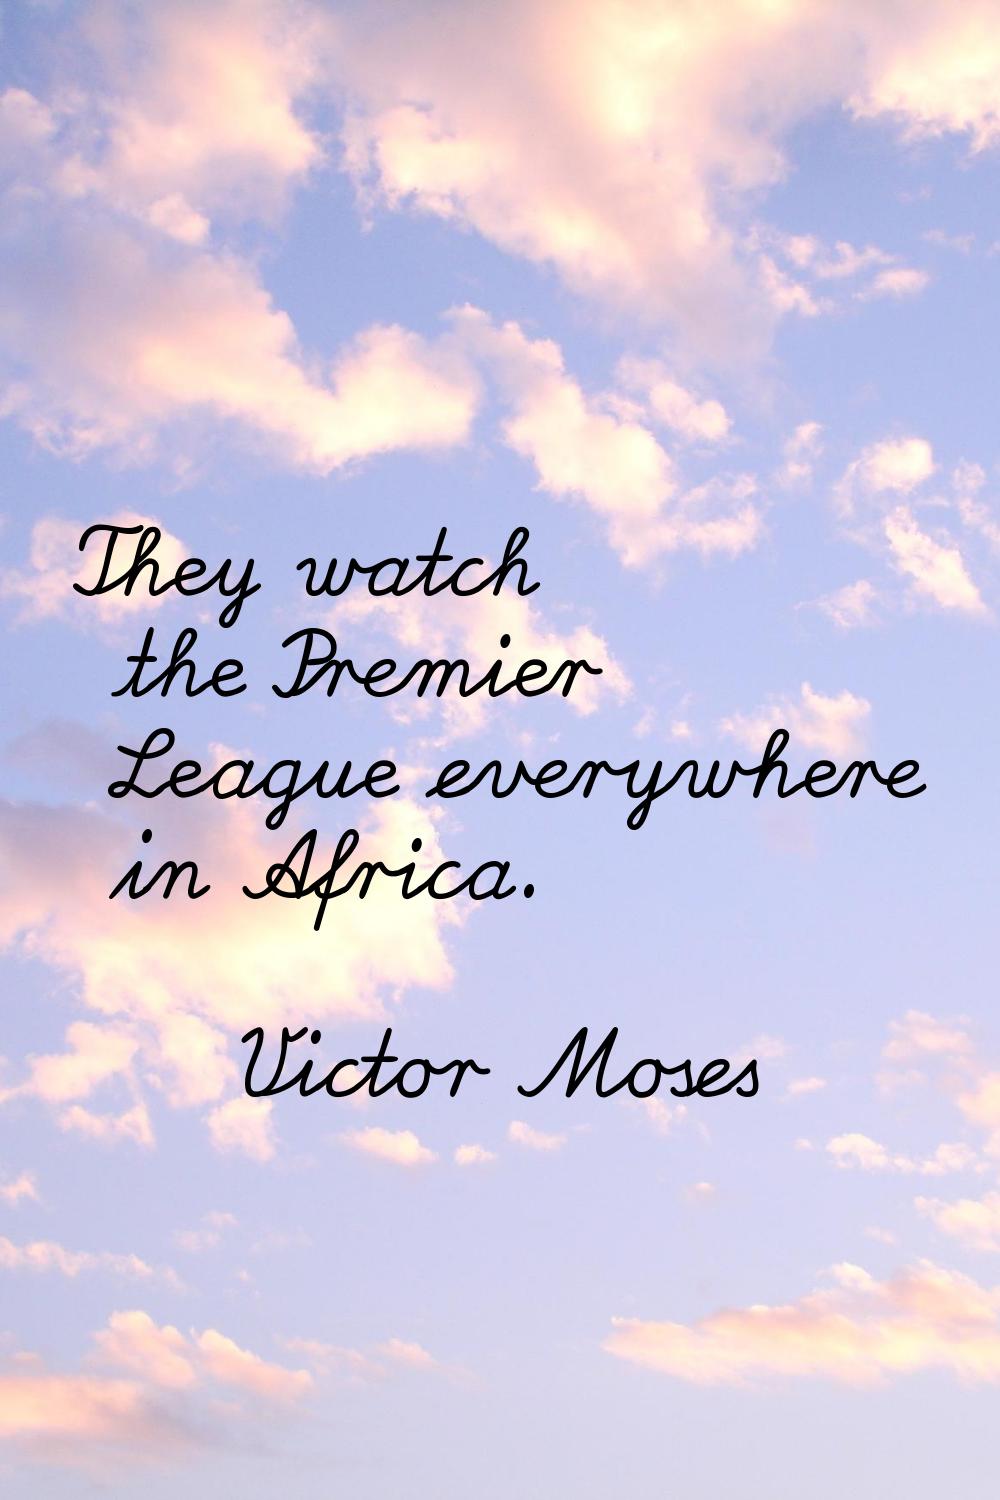 They watch the Premier League everywhere in Africa.